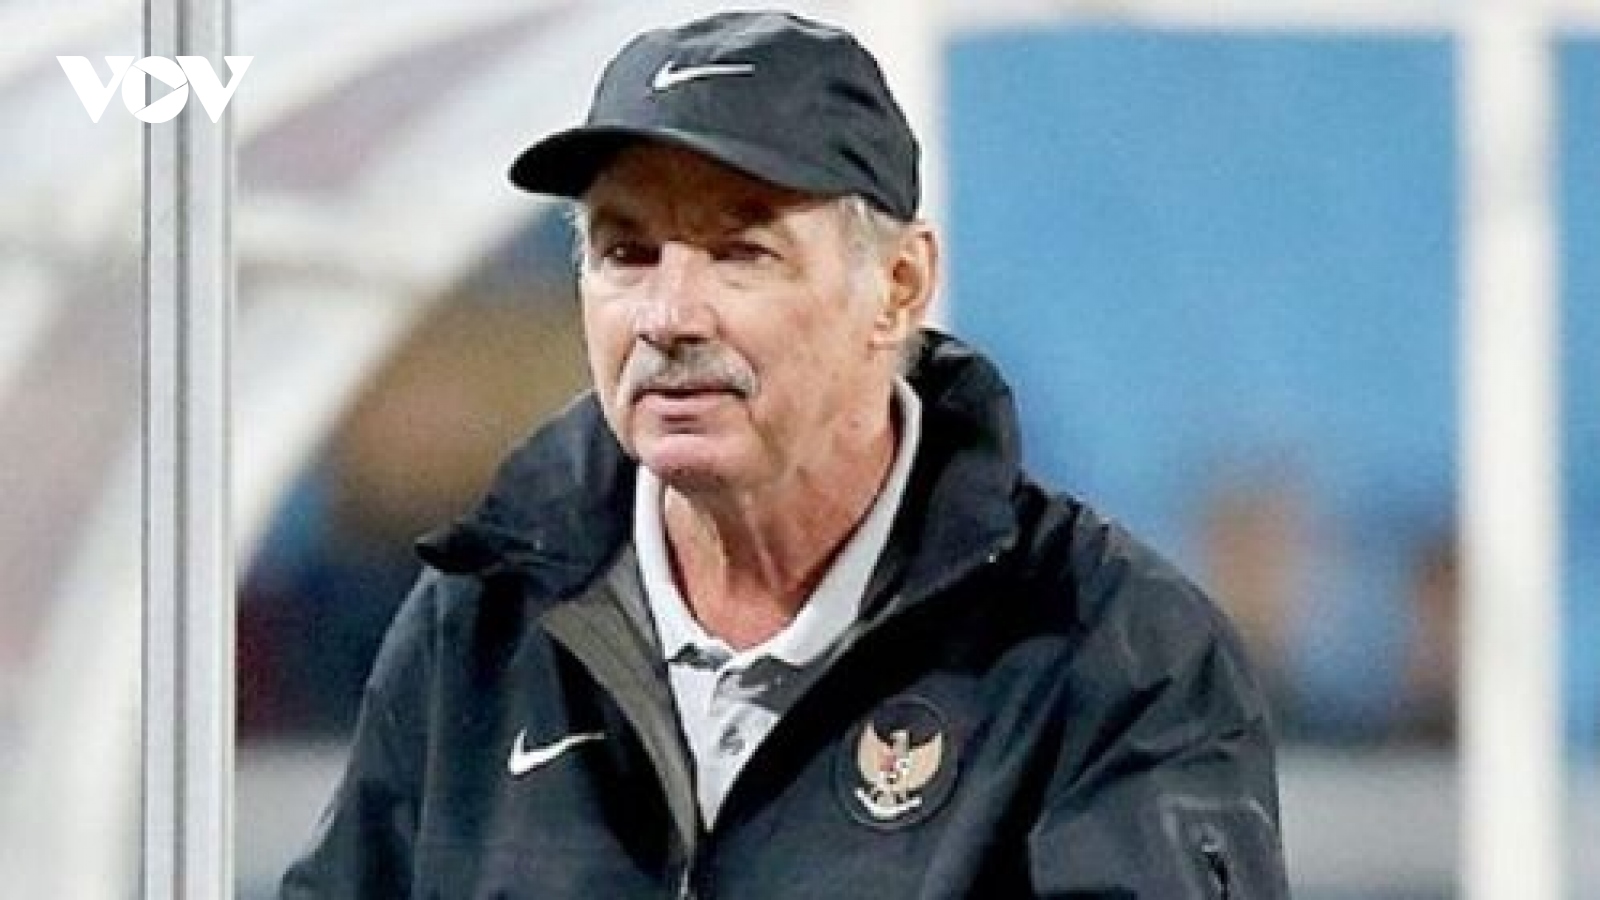 VIDEO: First match of Alfred Riedl’s reign as national team coach